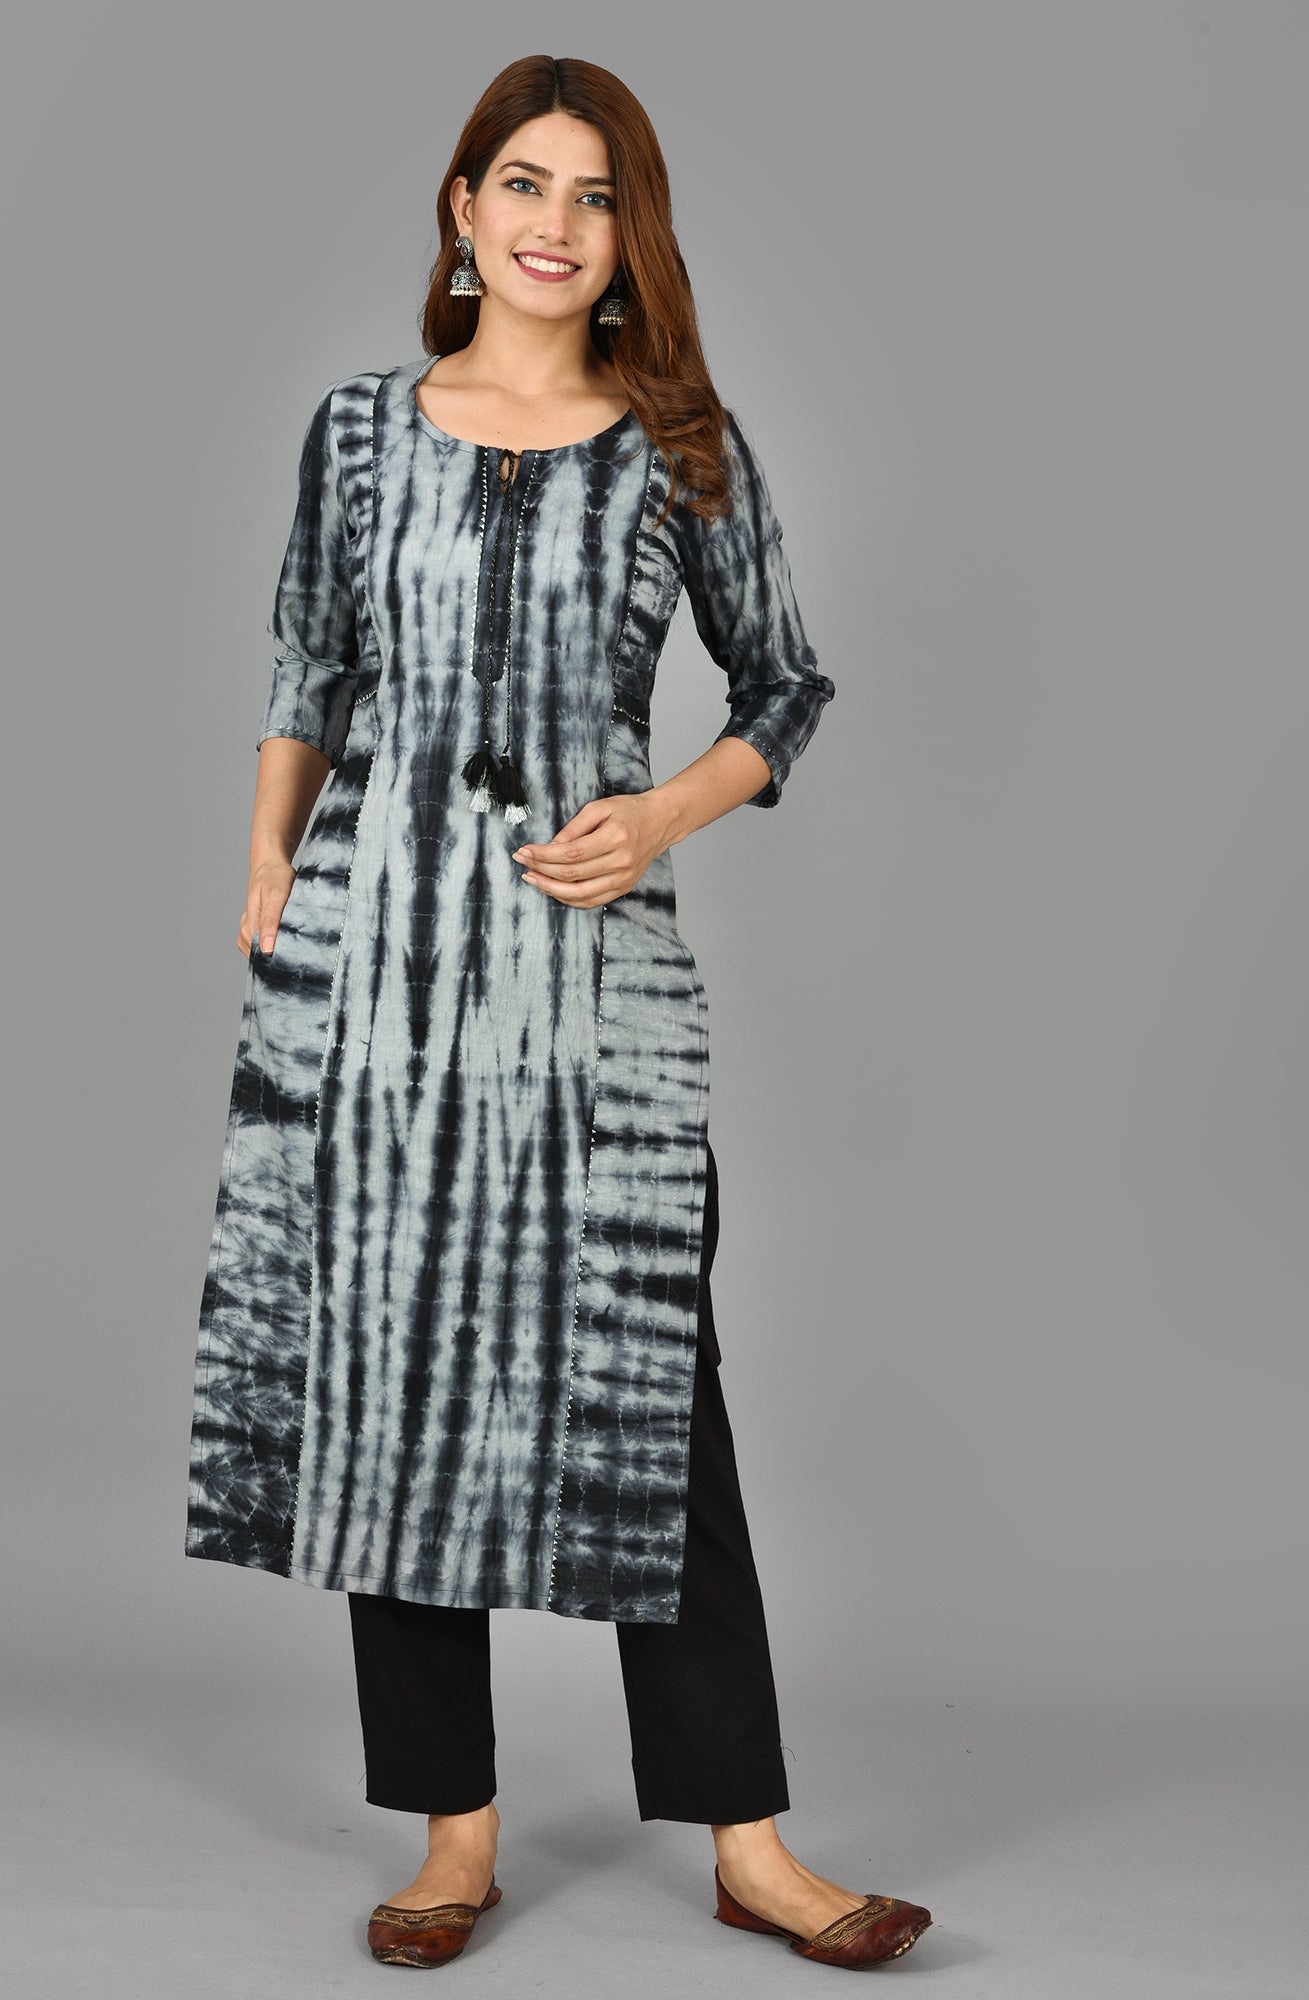 Tie dye Print/Latest trends of clothing/Pakistani Dresses ideas/Kurti  designs for girls/lawn s… | Tie dye dress outfit, Fashion design dress,  Fashion dresses casual